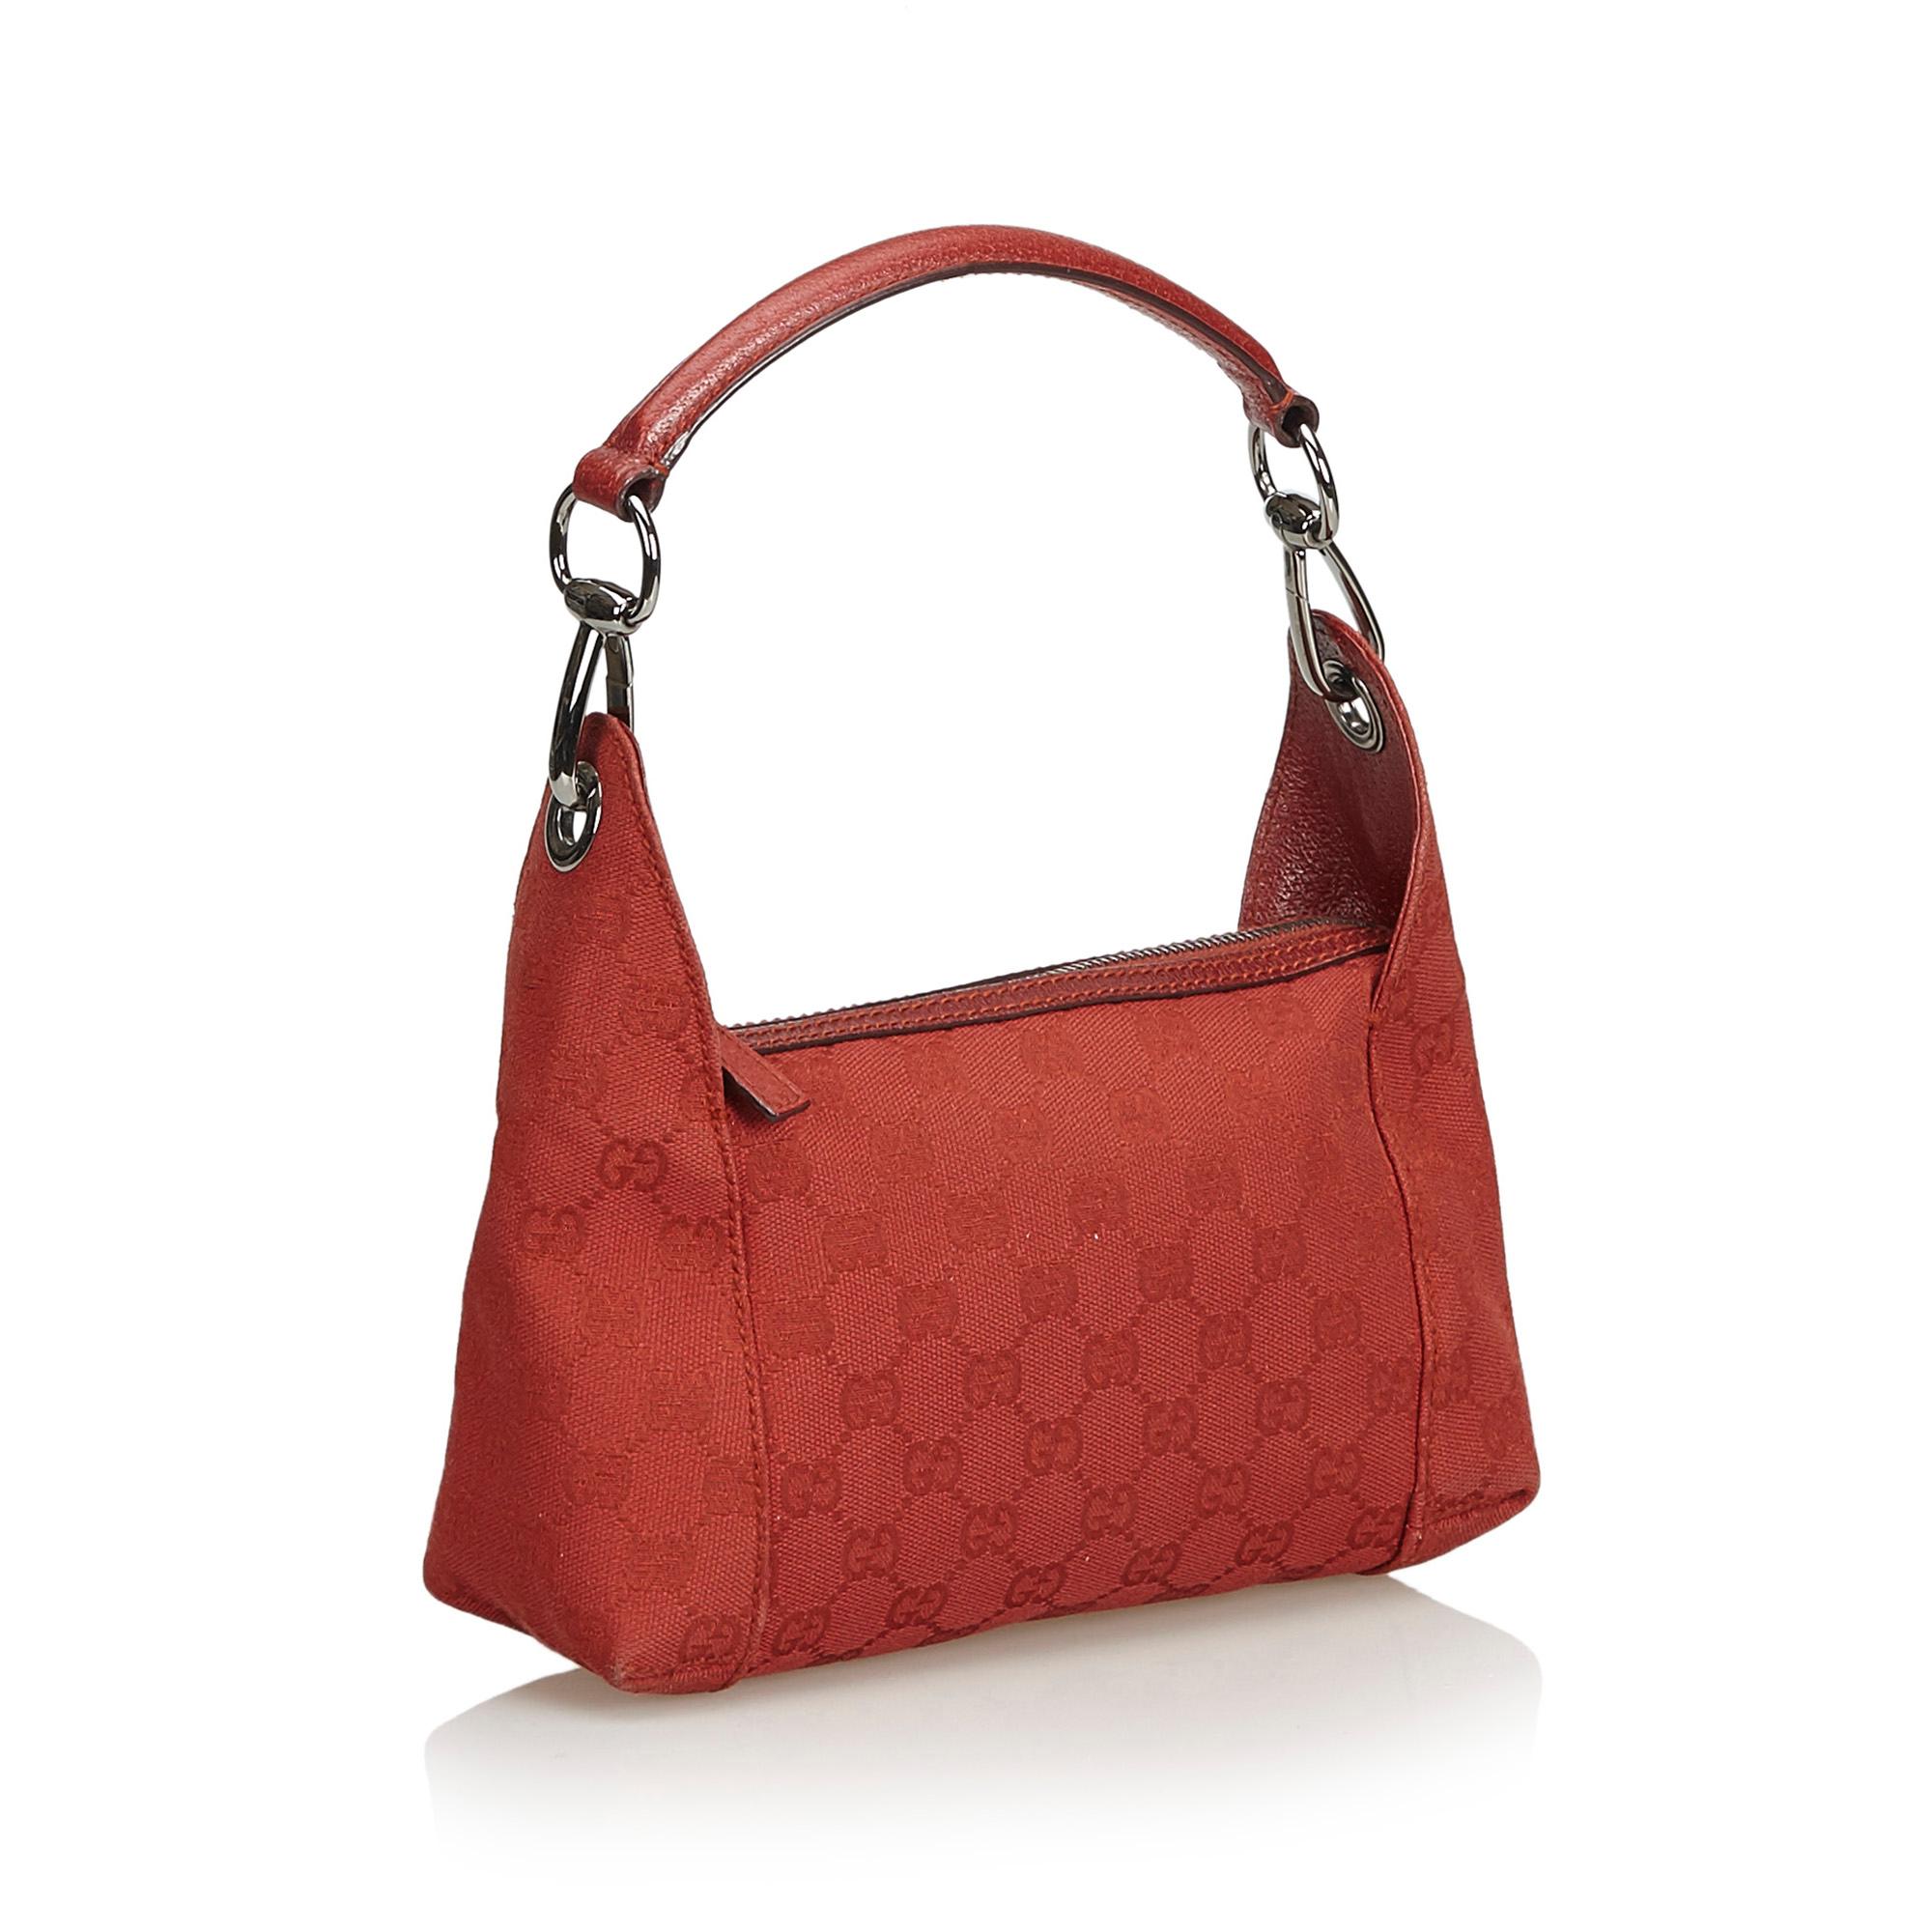 This shoulder bag features a jacquard body with leather trim, flat leather handle, top zip closure, and interior zip pocket. It carries as B+ condition rating.

Inclusions: 
Dust Bag

Dimensions:
Length: 15.00 cm
Width: 23.00 cm
Depth: 6.00 cm
Hand